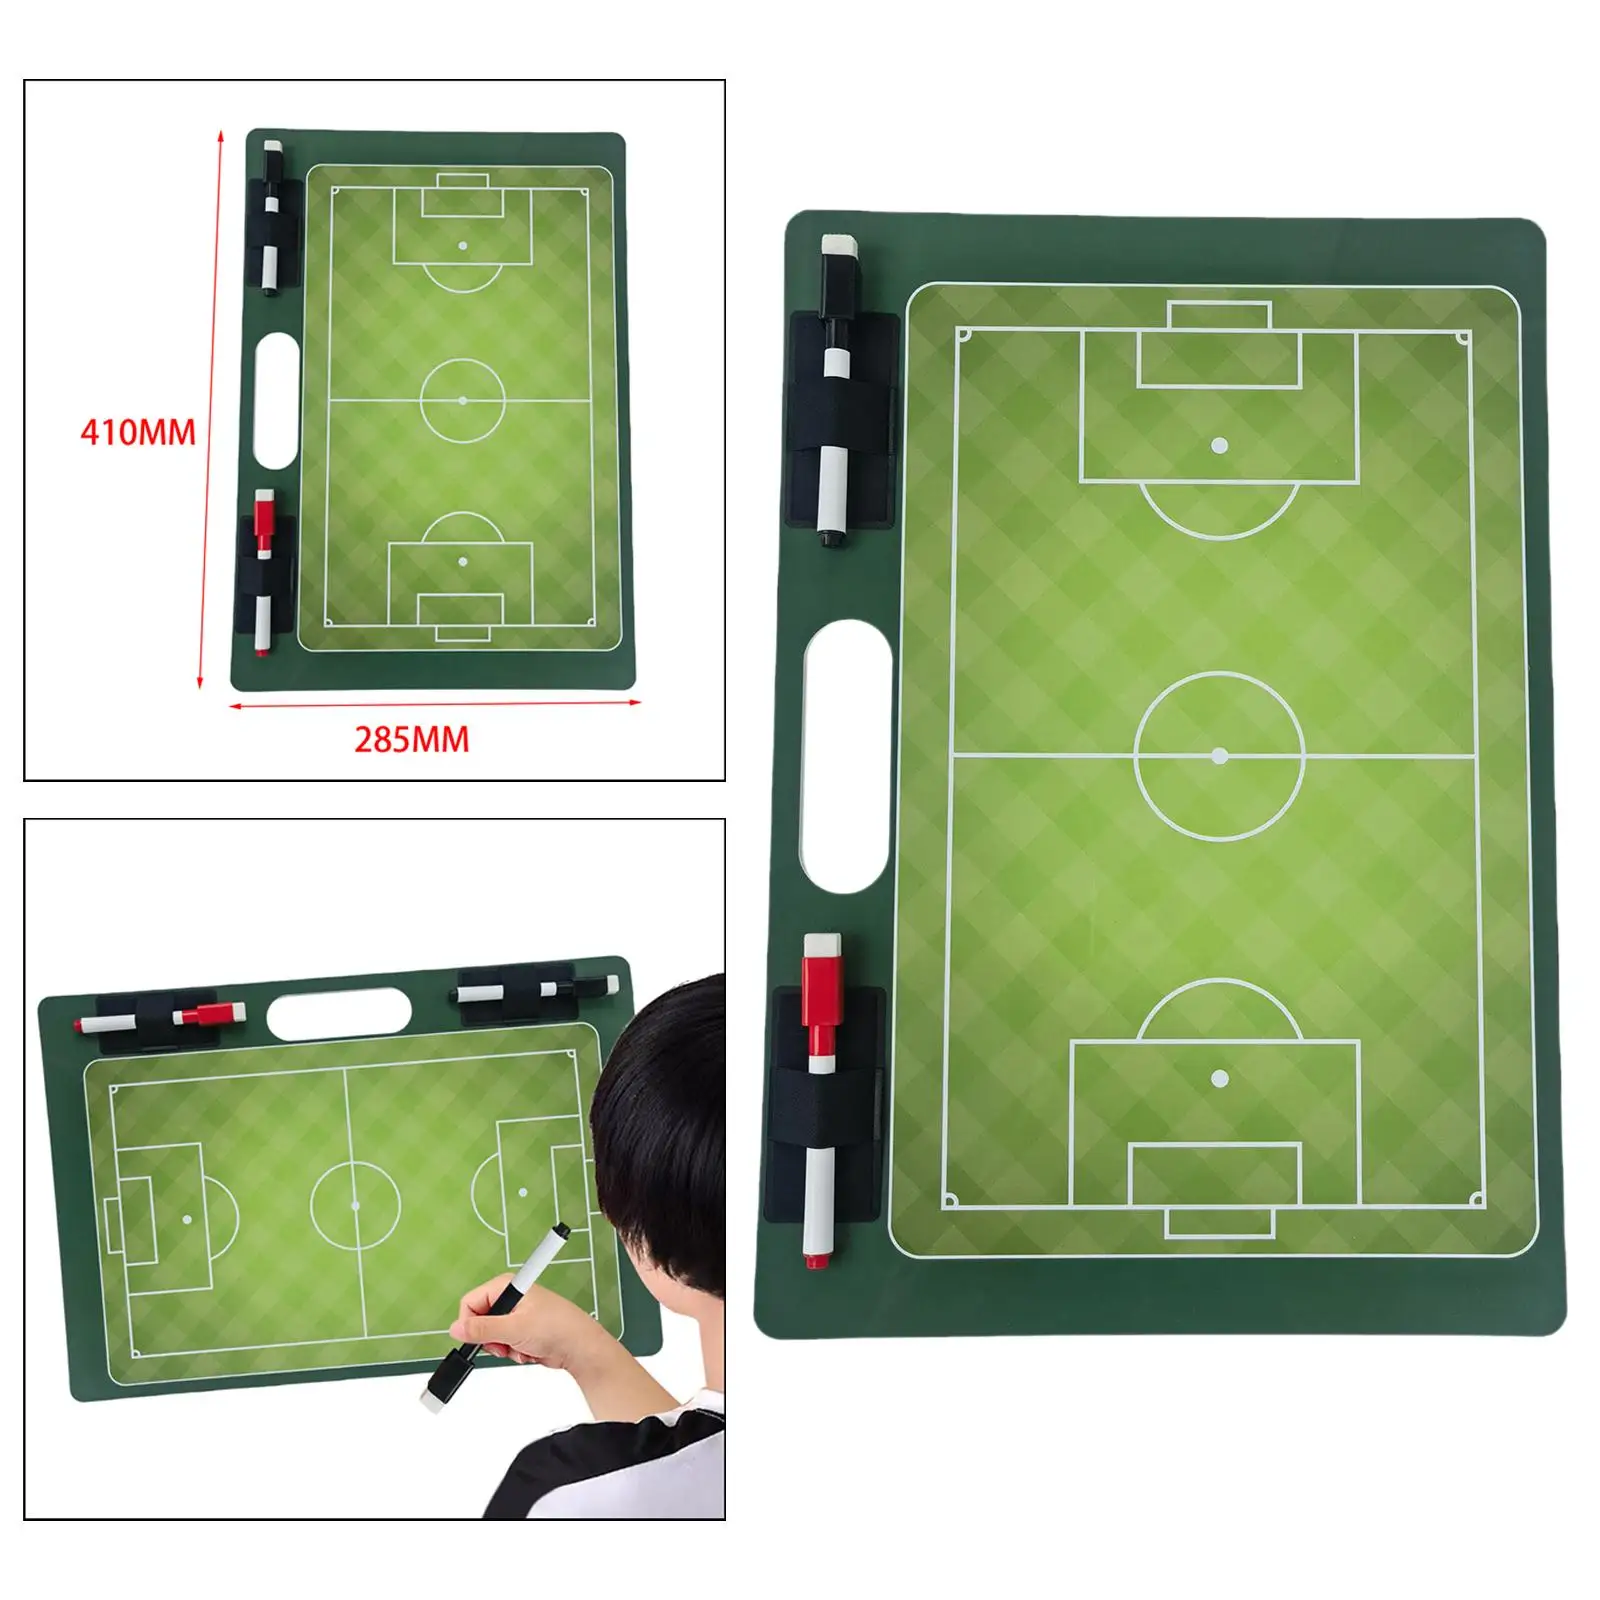 Football Coaching Board Layout Notebook Writing Boards Marker Board Coaches Clipboard Soccer Professional for Practice Coach